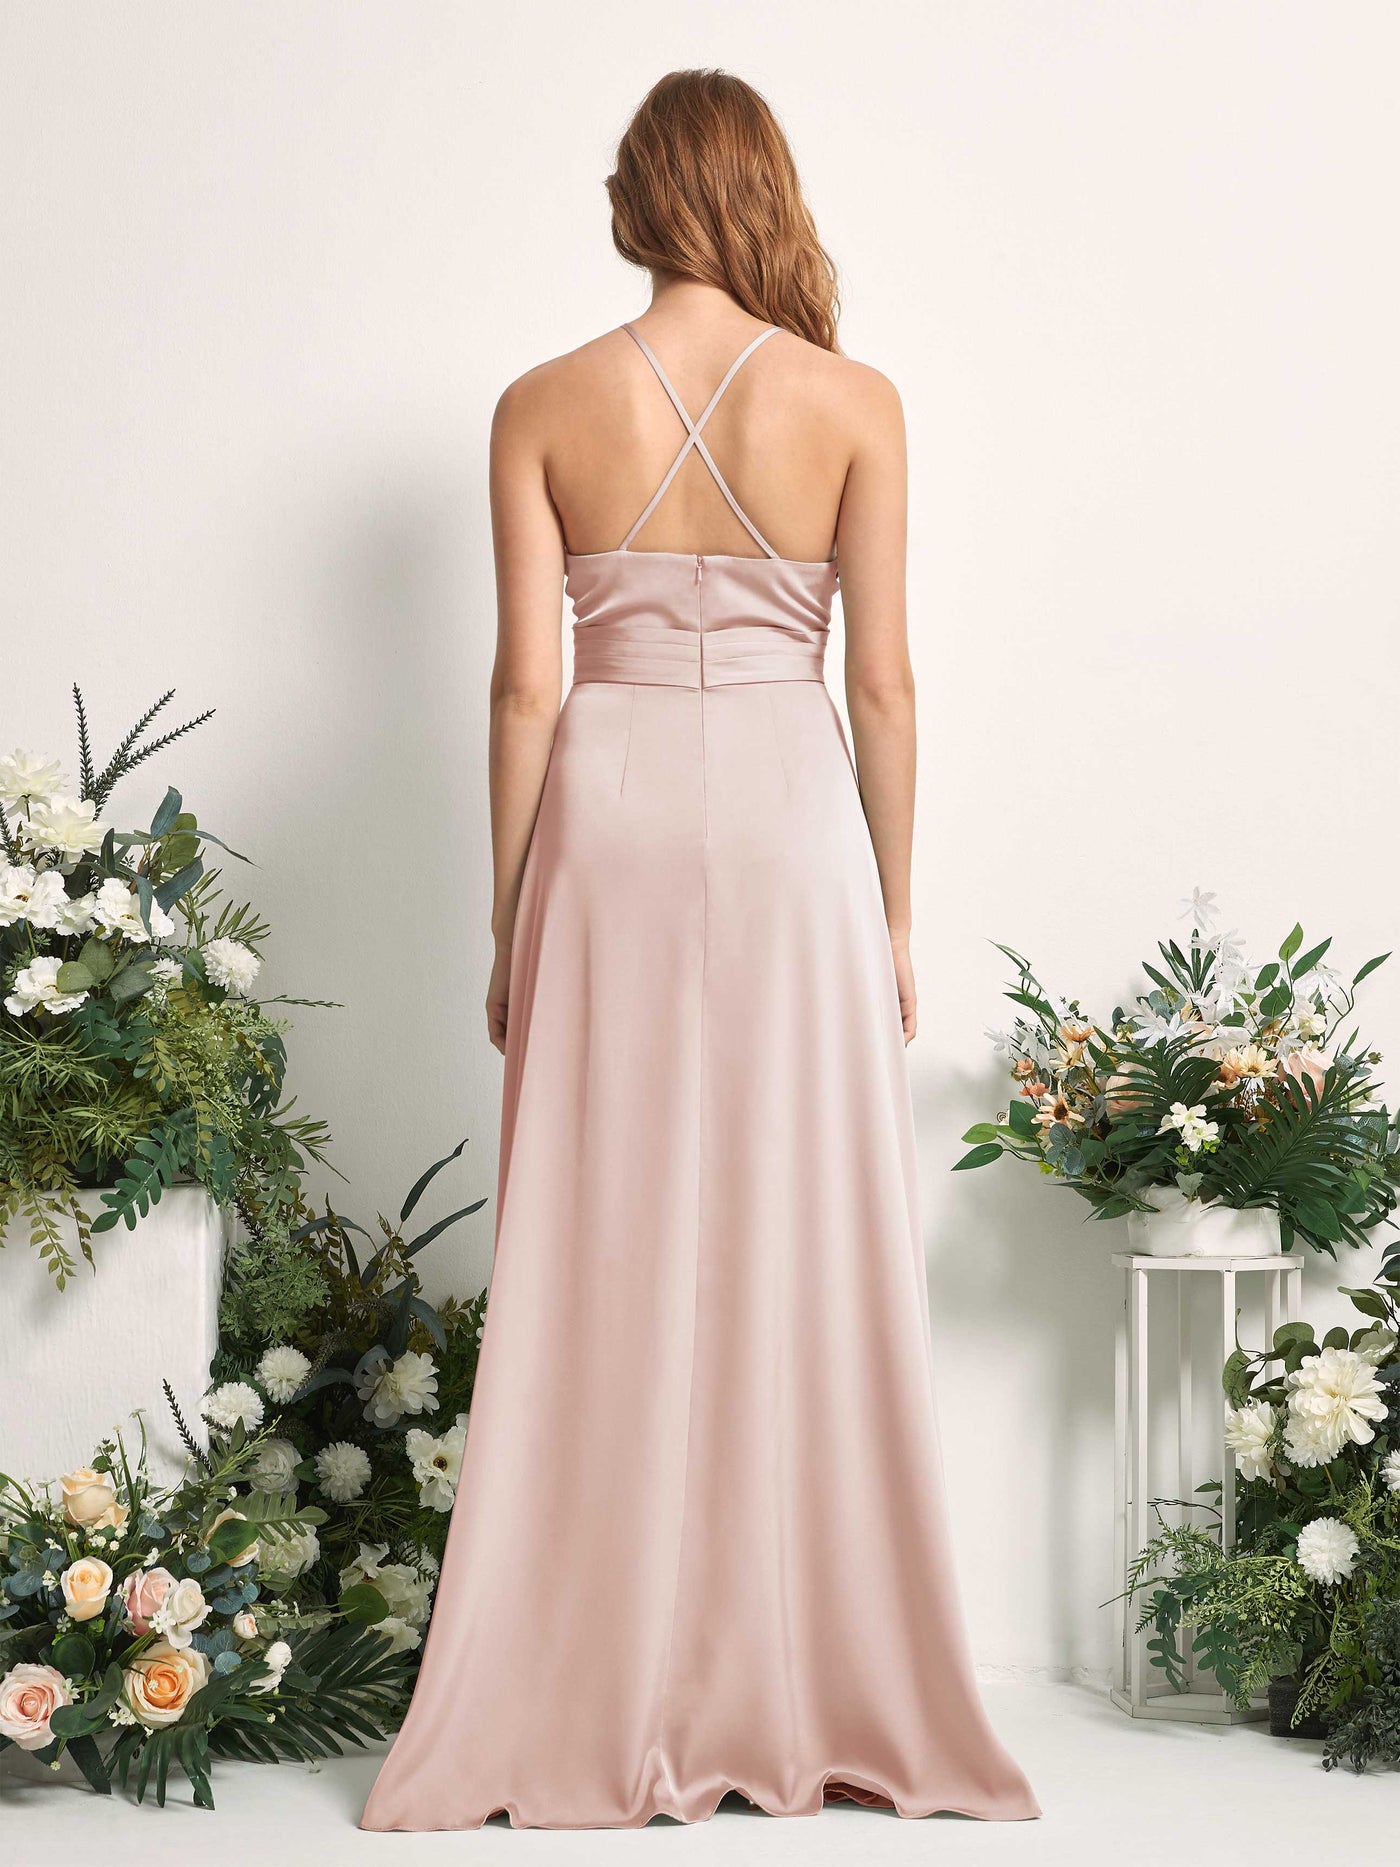 Pearl Pink Bridesmaid Dresses Bridesmaid Dress A-line Satin Spaghetti-straps Full Length Sleeveless Wedding Party Dress (80225710)#color_pearl-pink